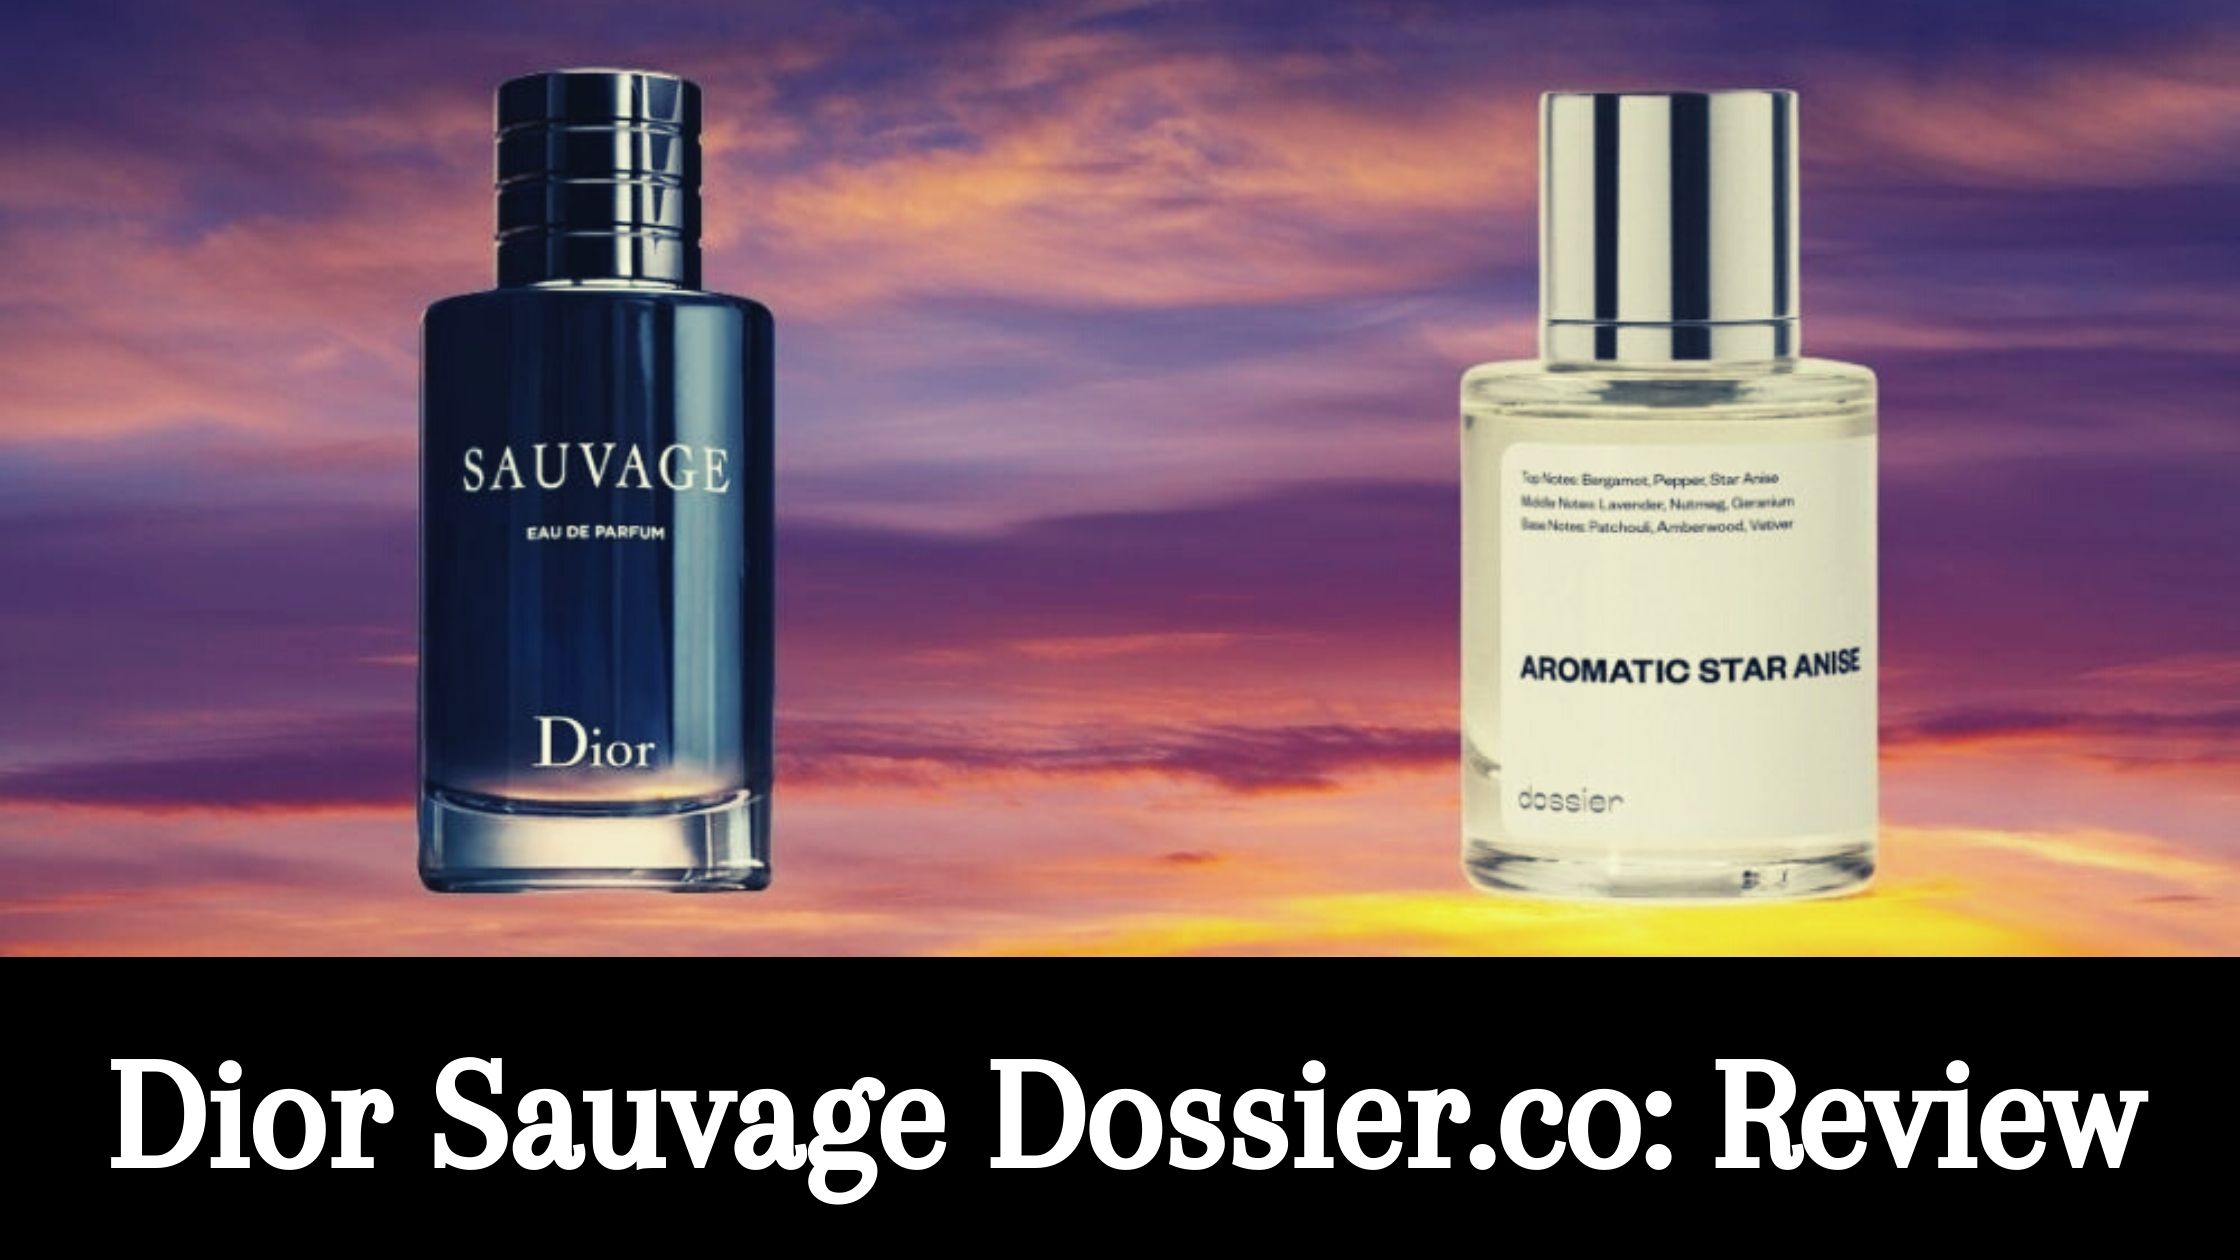 Dior Sauvage Dossier.co - Full Review